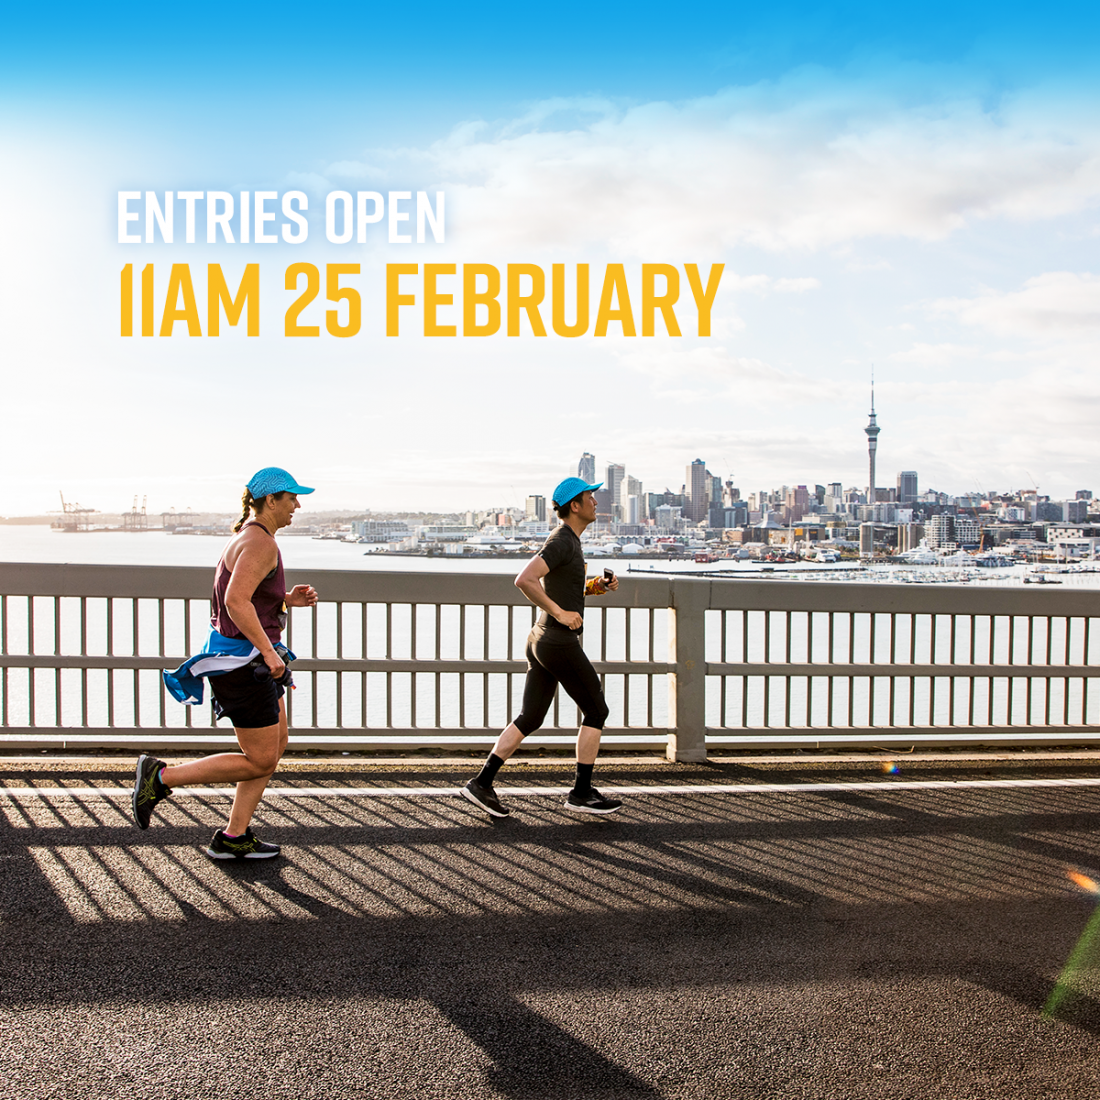 2021 Entries Opening 25 February